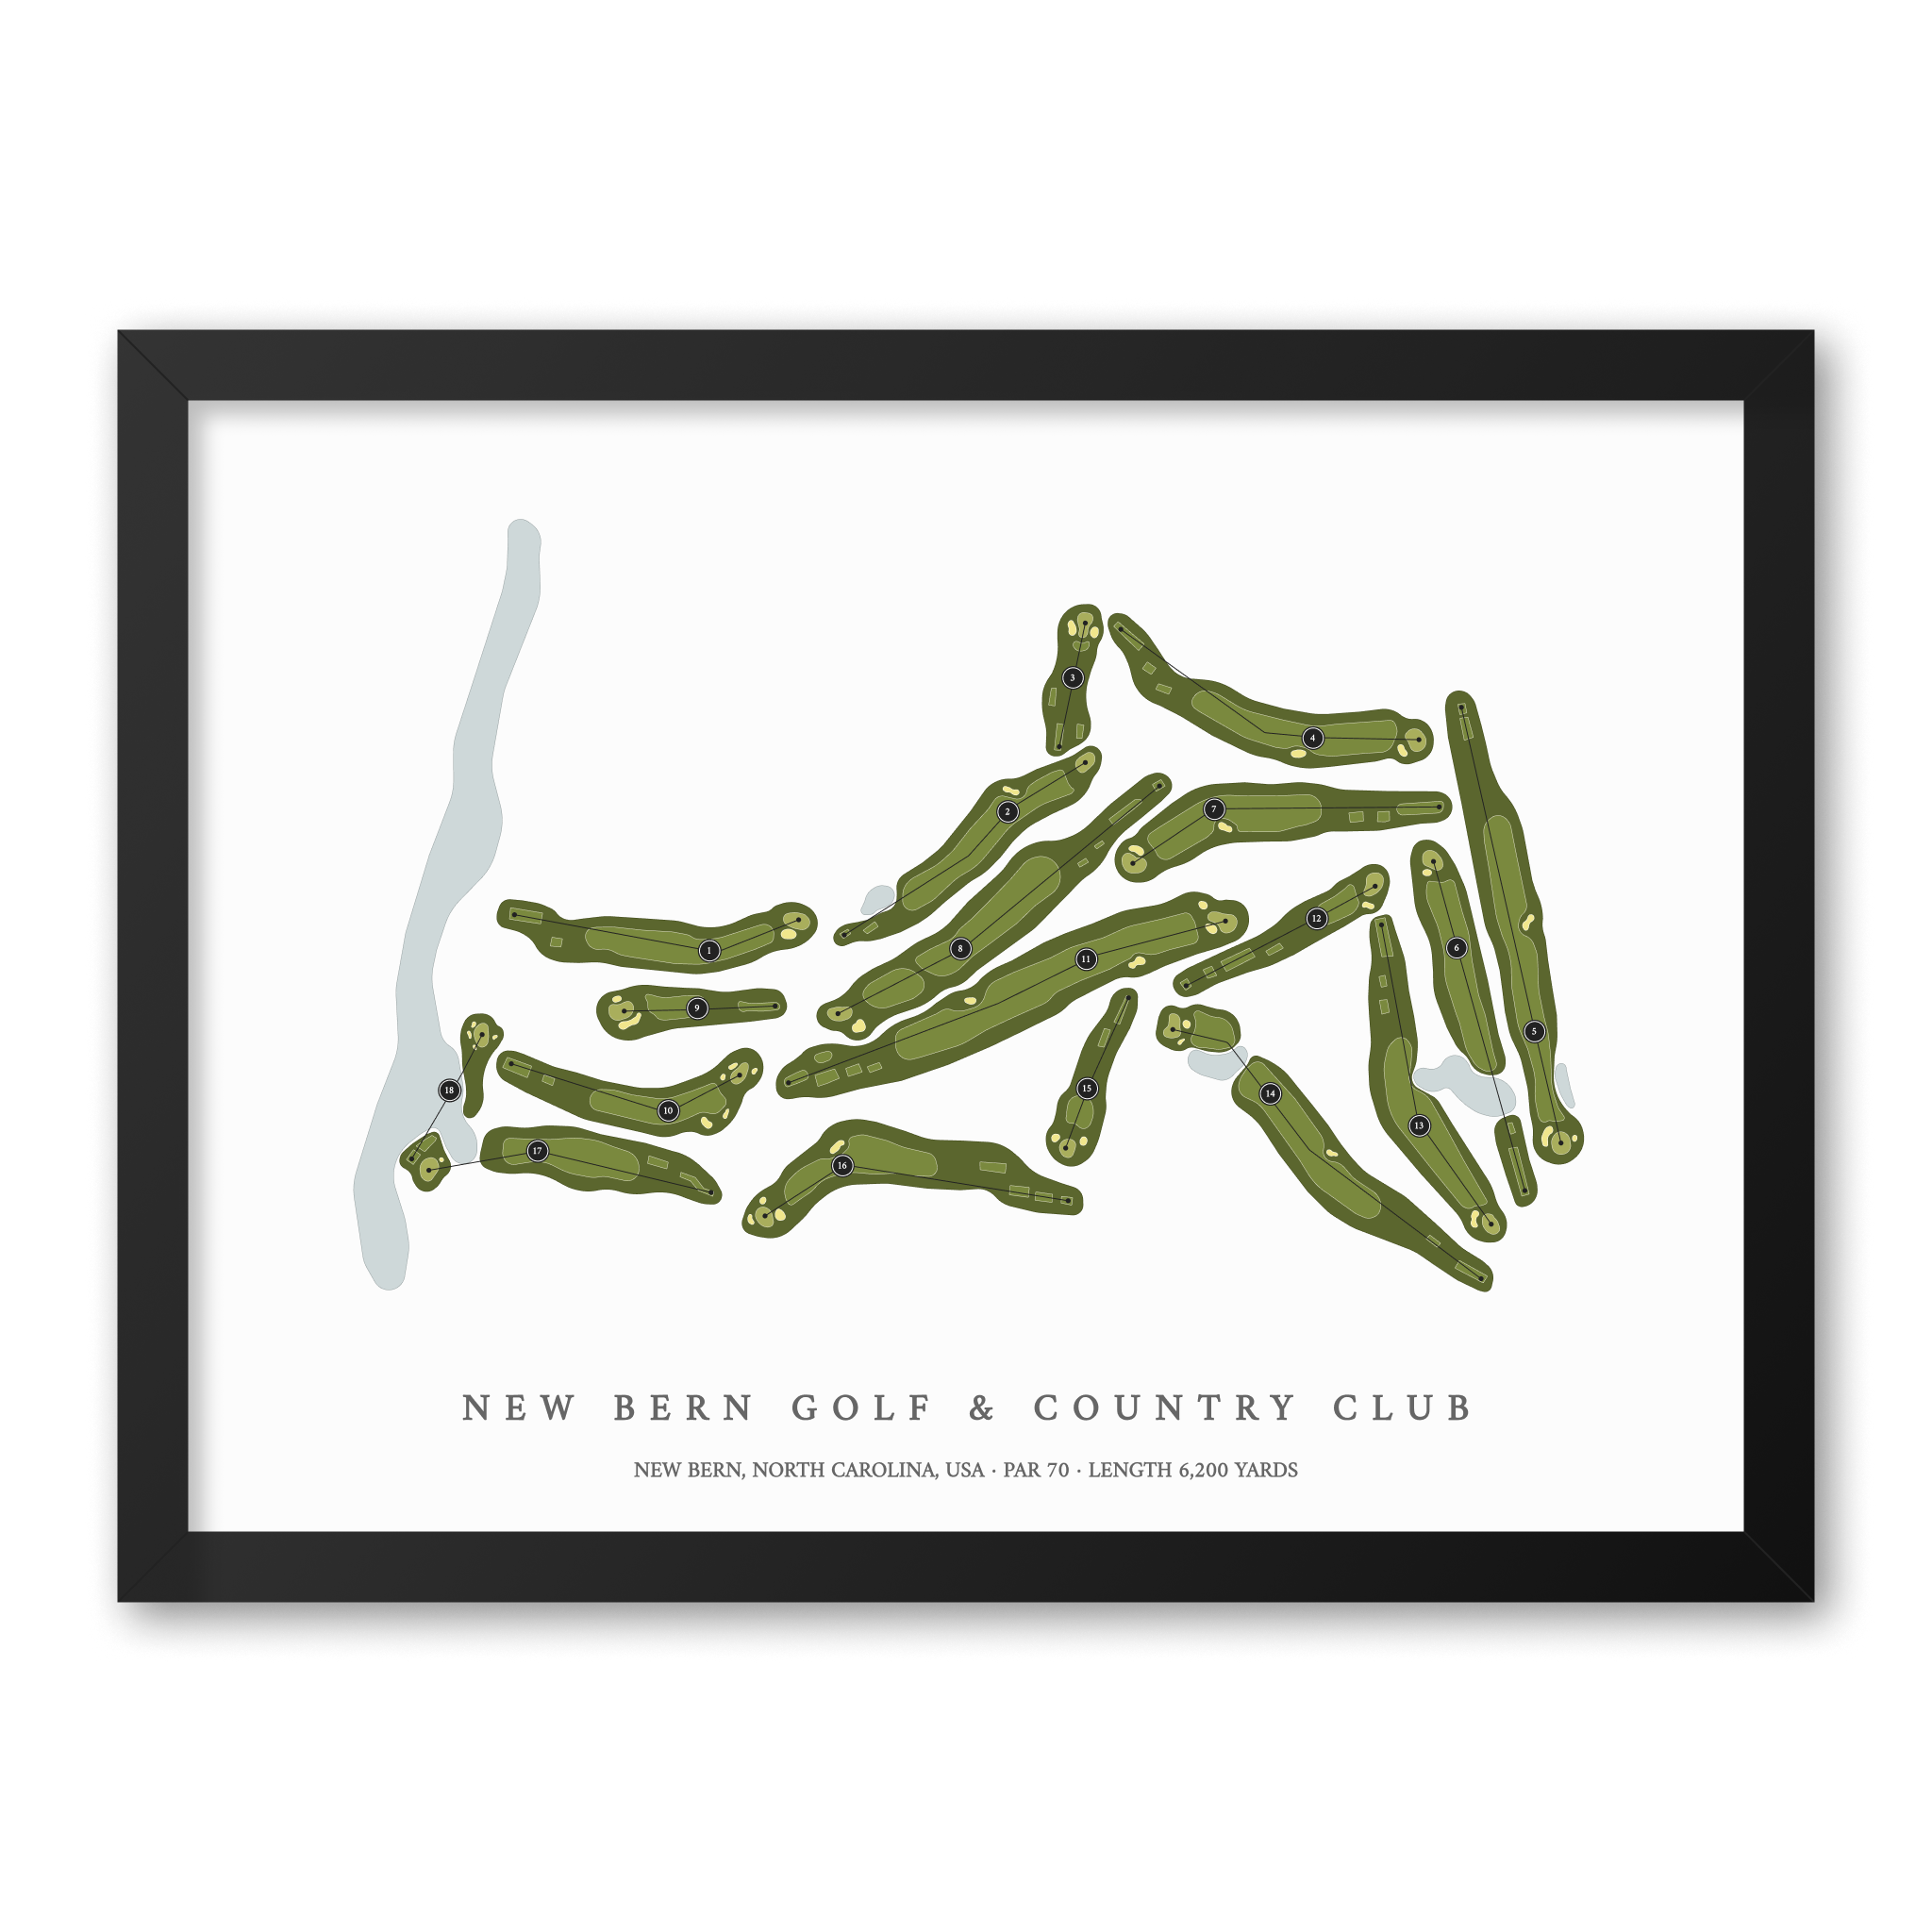 New Bern Golf & Country Club| Golf Course Print | Black Frame With Hole Numbers #hole numbers_yes